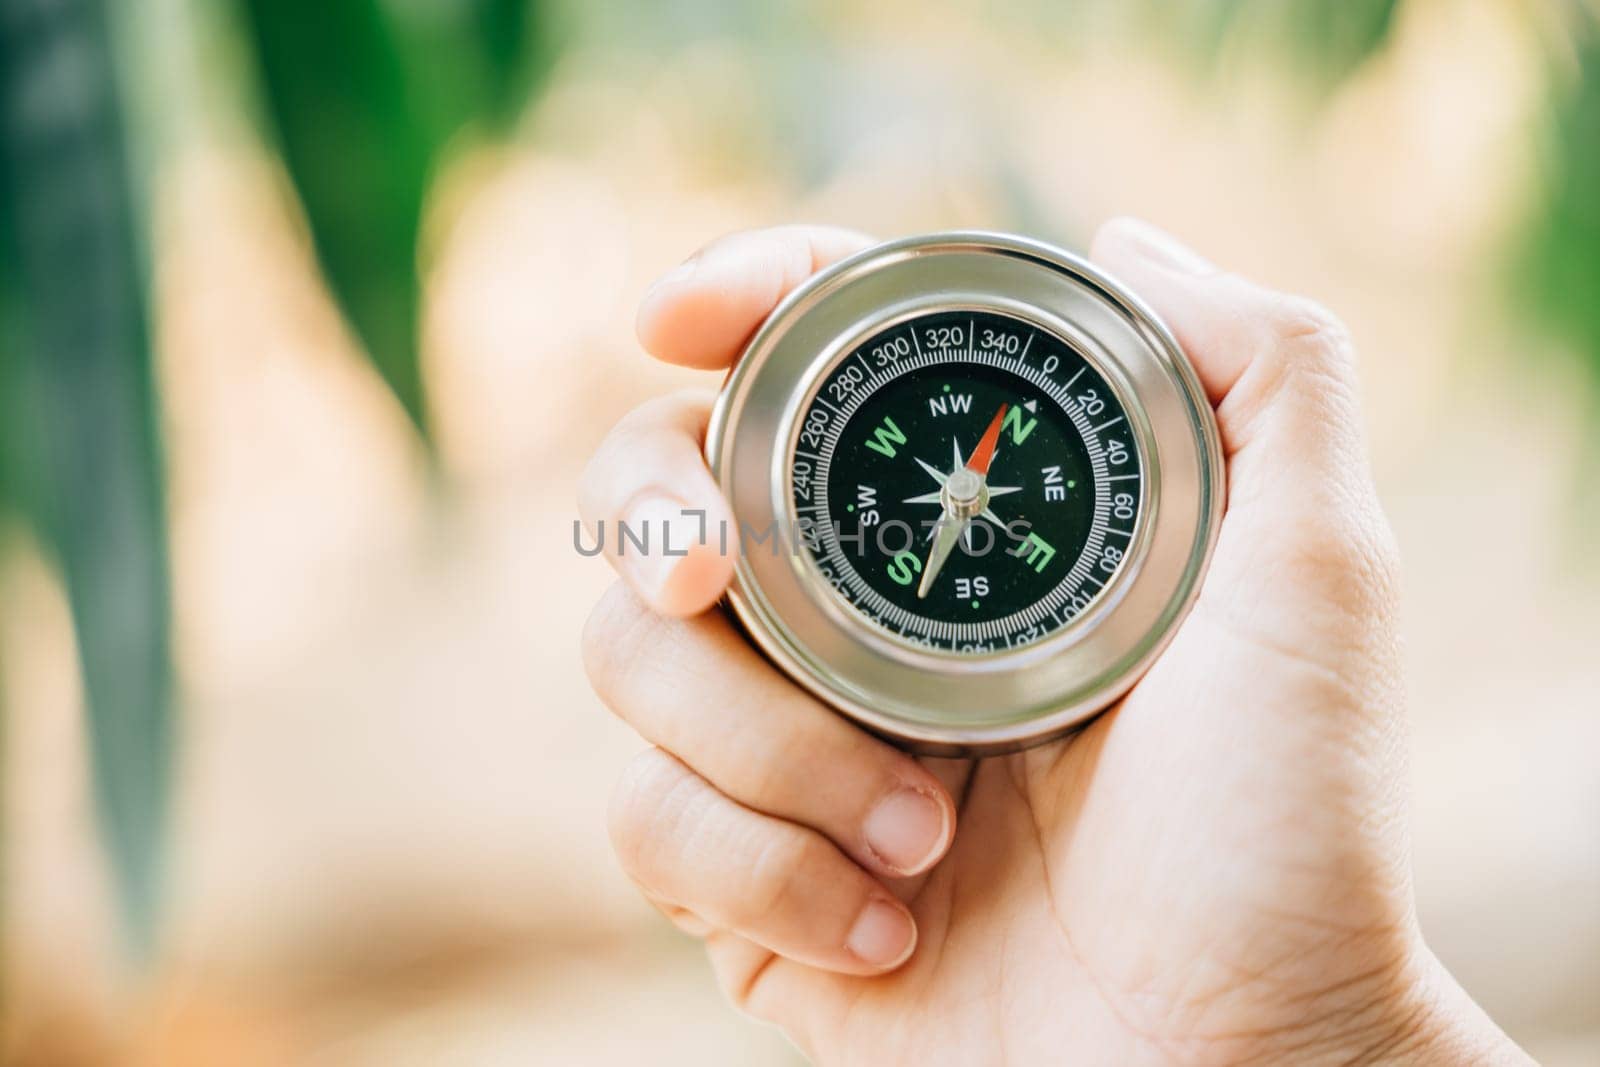 A traveler hand holds a compass in a park representing the search for direction and guidance. Amidst nature beauty the compass signifies exploration and discovery. by Sorapop